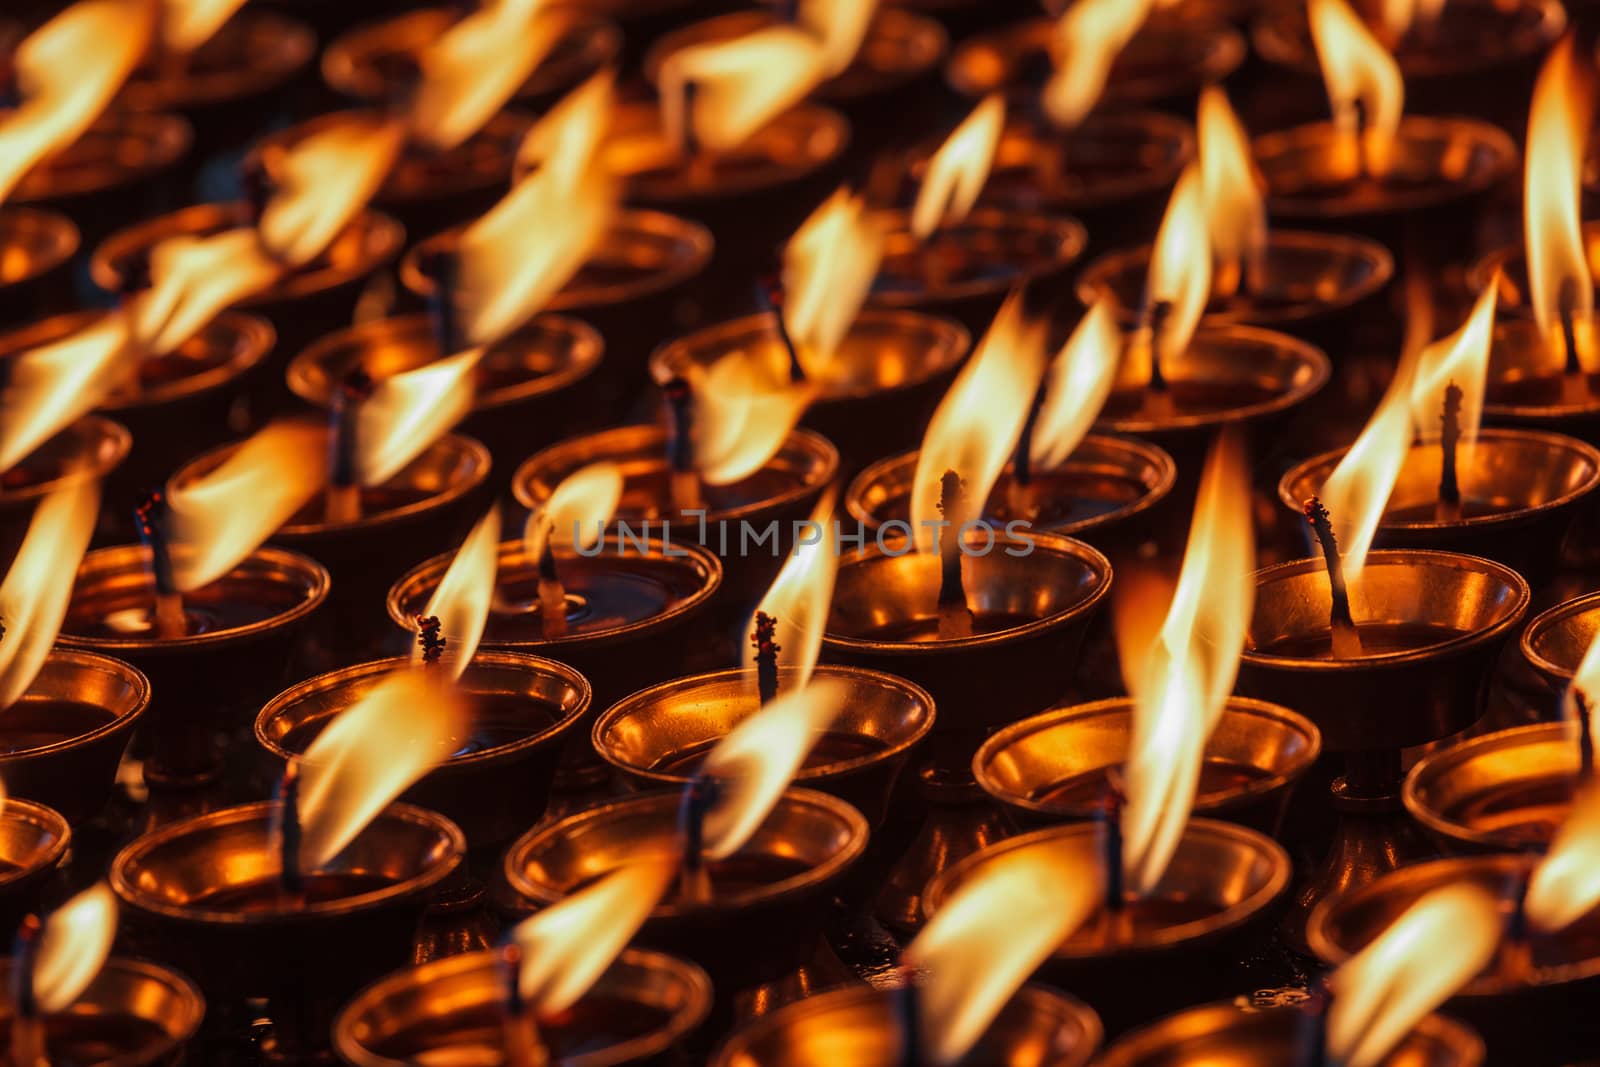 Burning candles in Buddhist temple by dimol